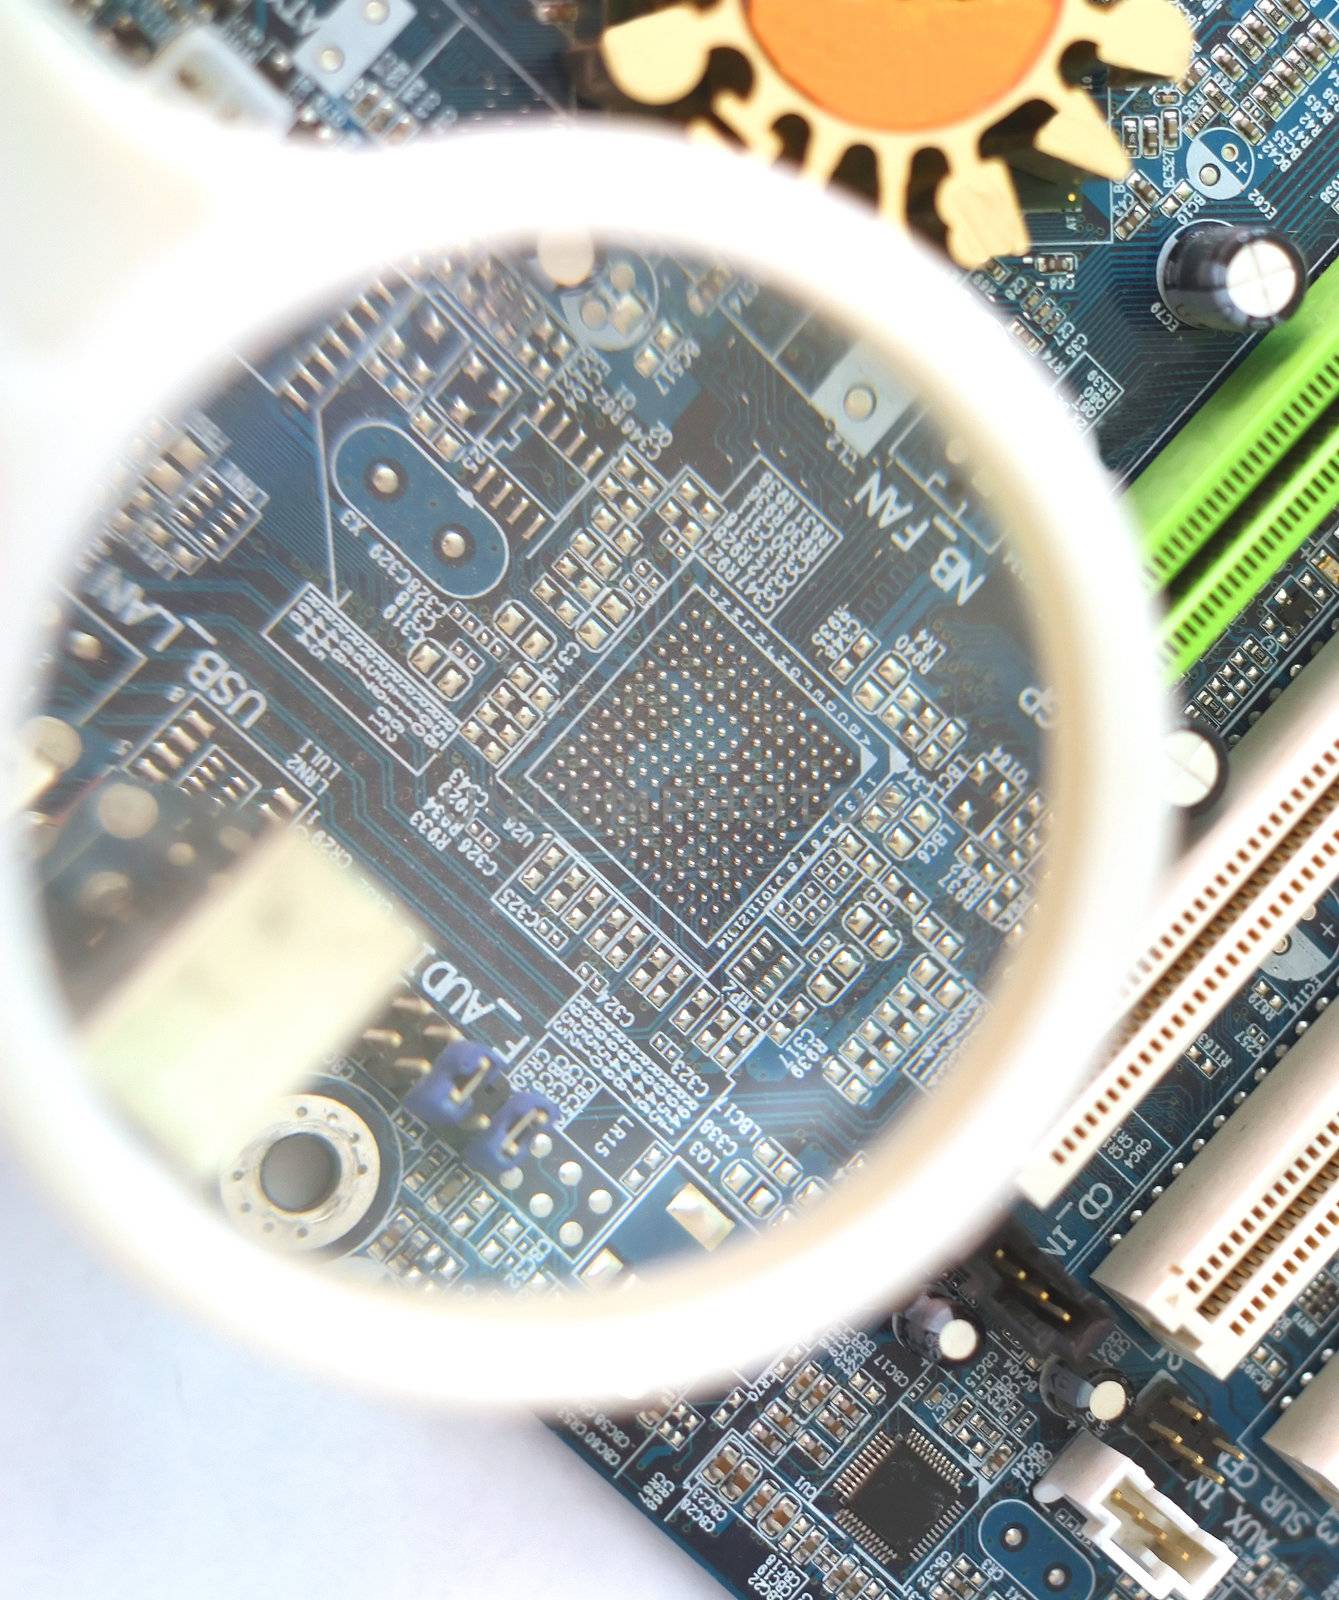 Computer mainboard under magnifying glass. Shallow DOF.